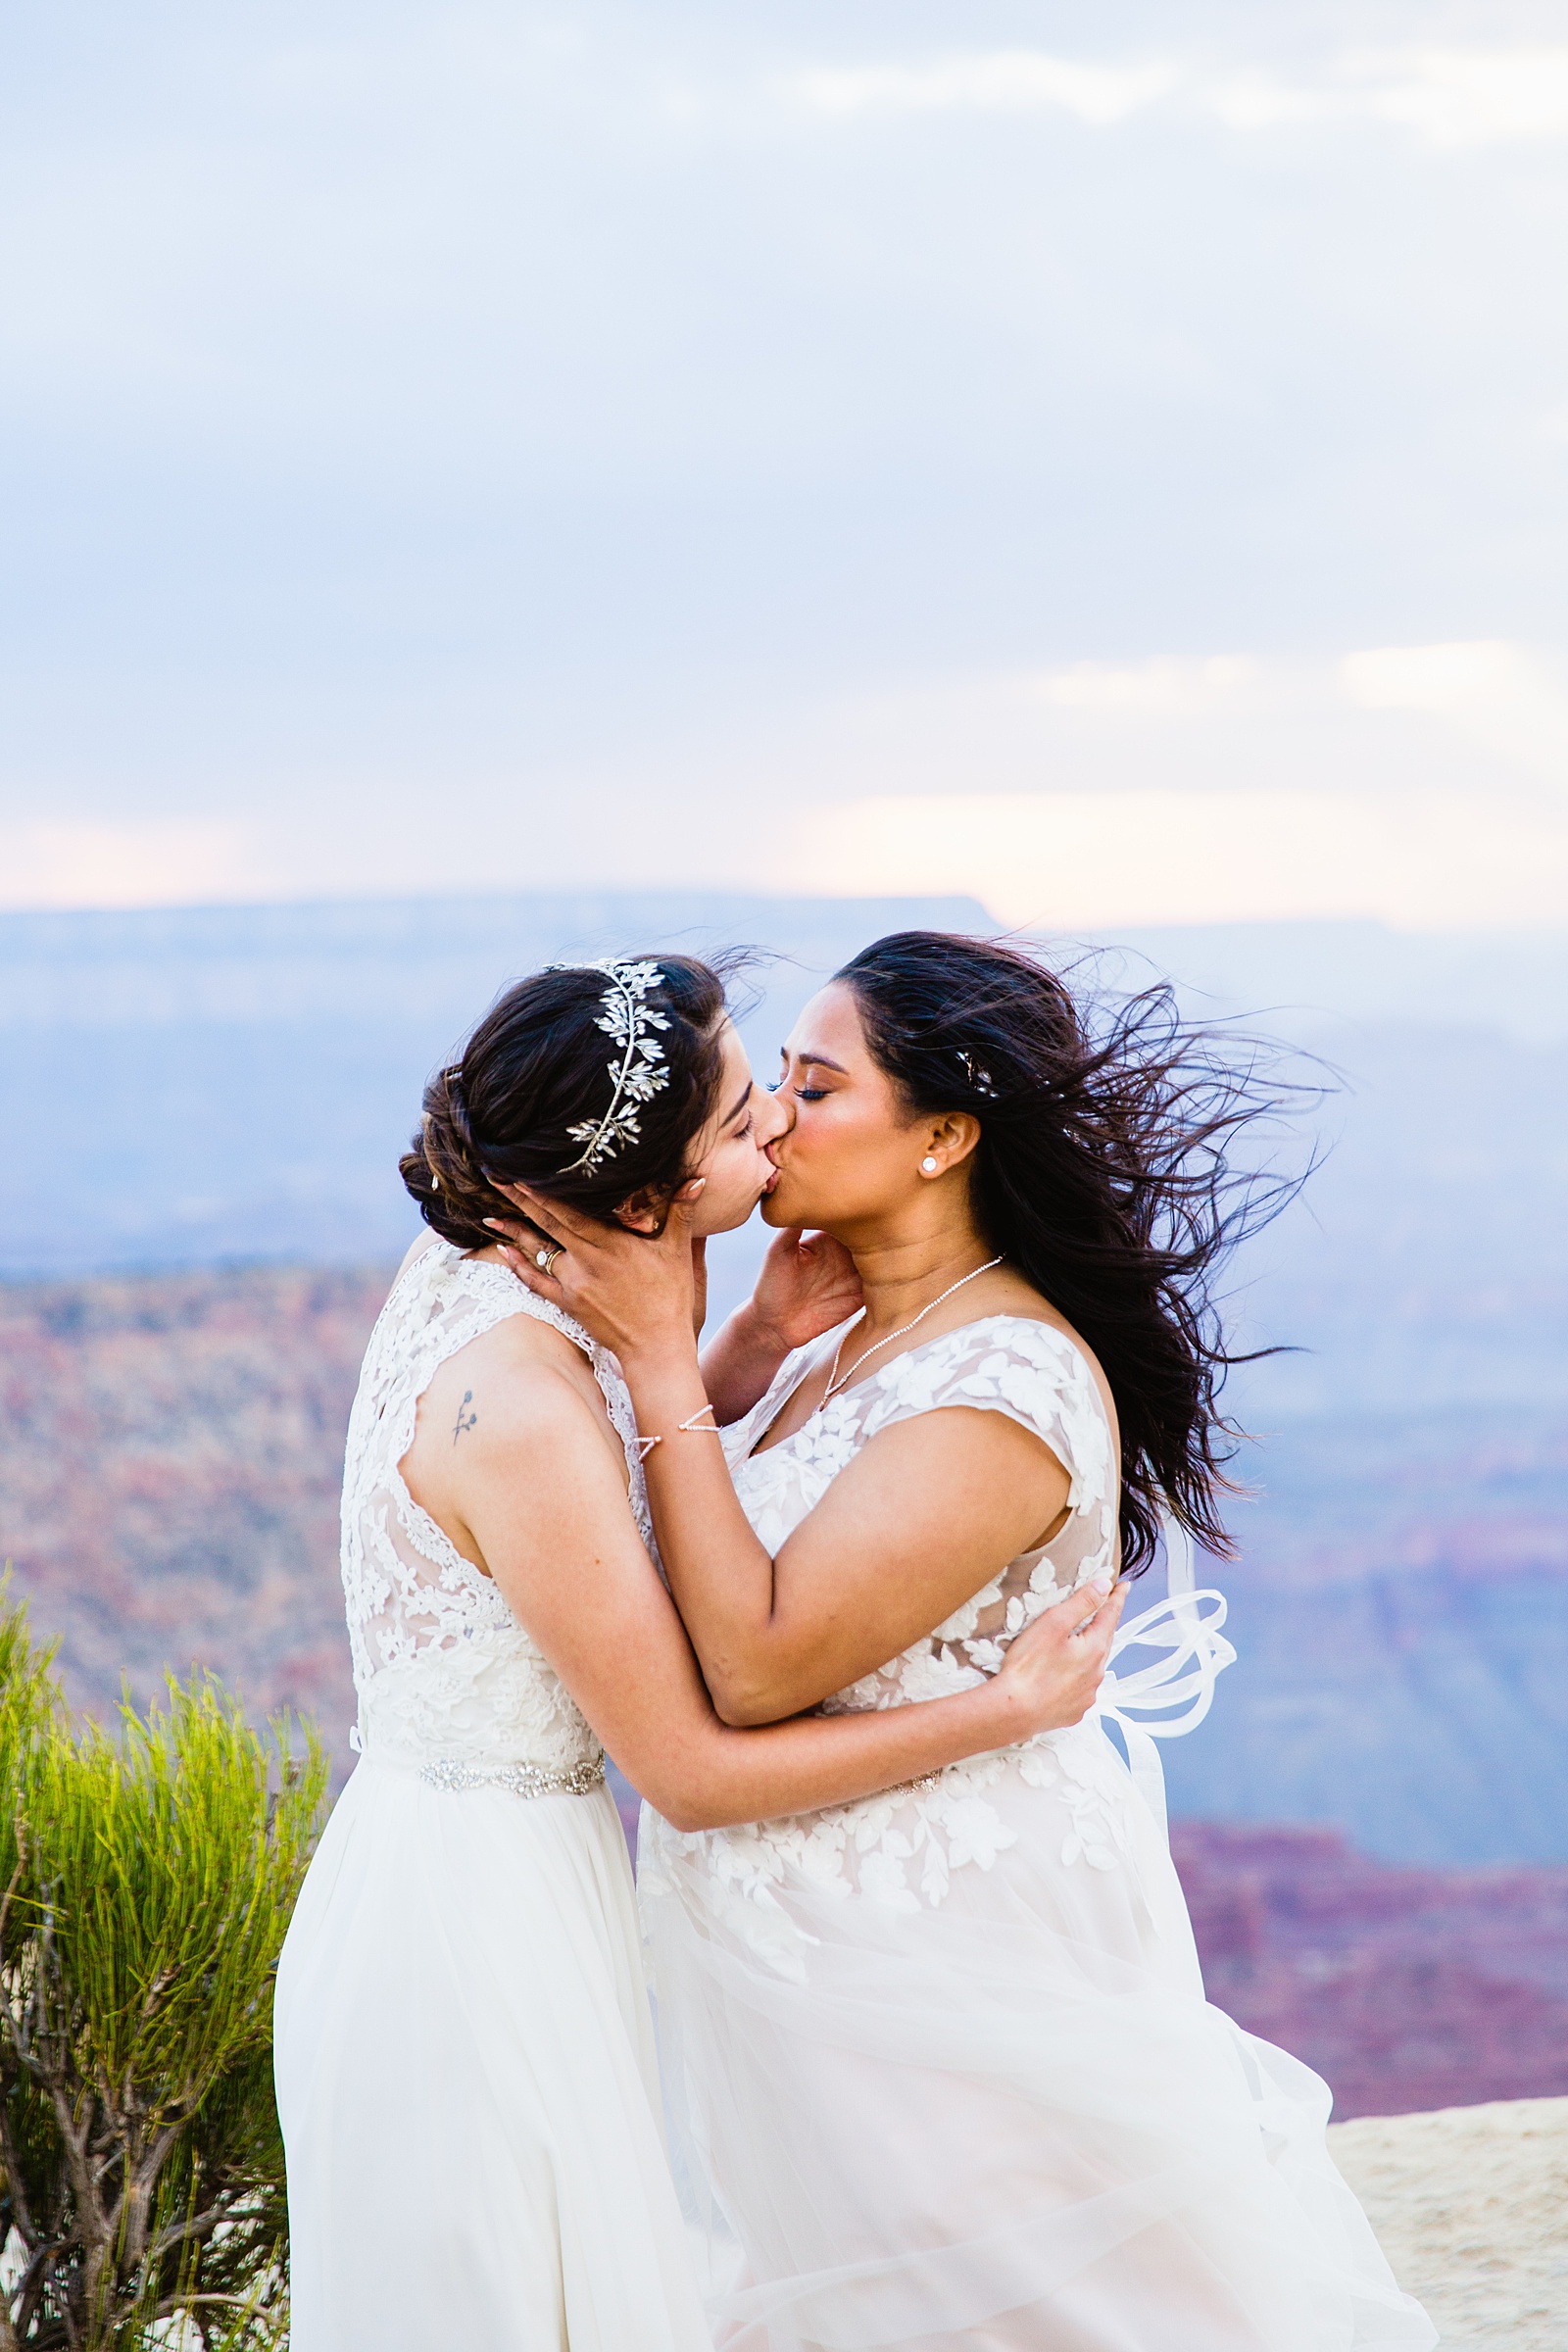 Same sex couple share their first kiss during their wedding ceremony at Moran Point by Arizona elopement photographer PMA Photography.